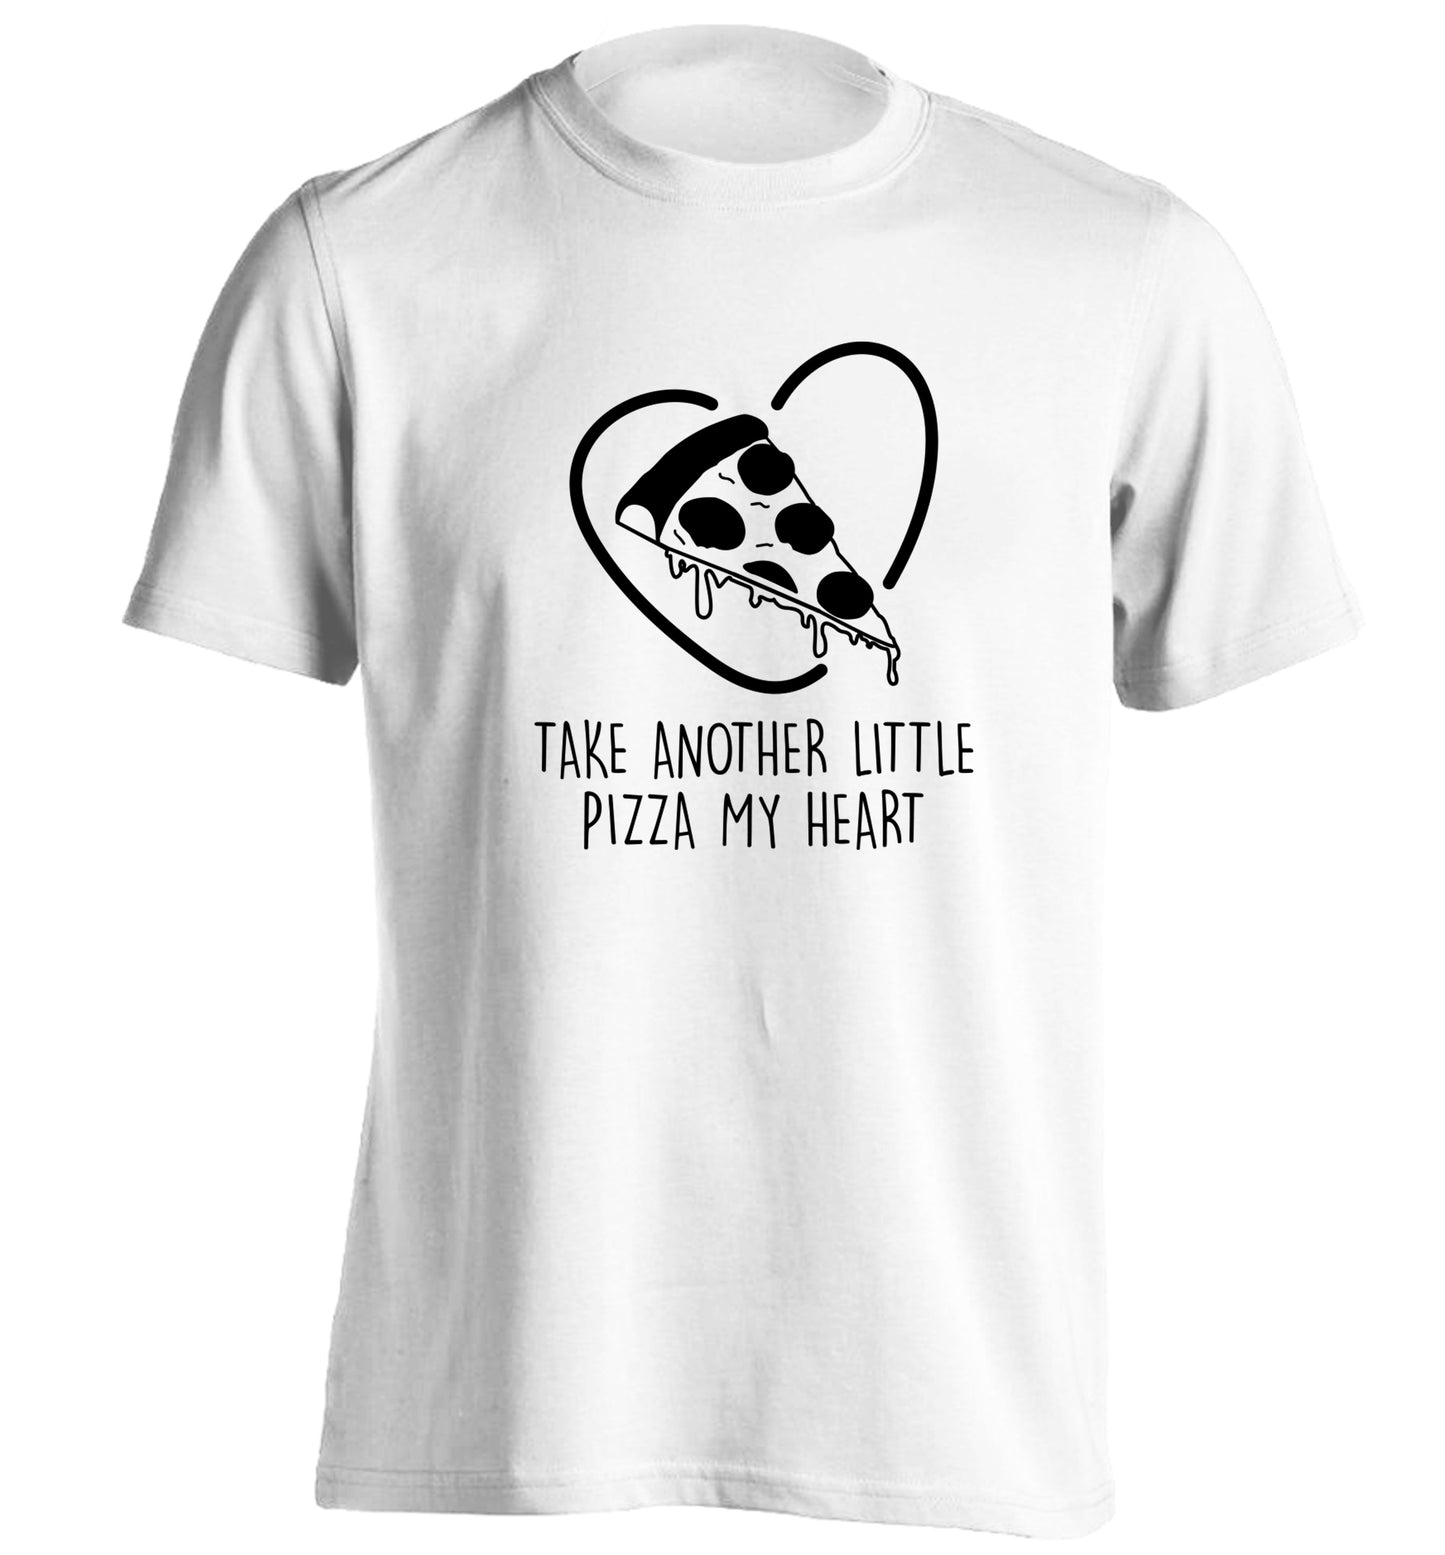 Take another little pizza my heart adults unisex white Tshirt 2XL